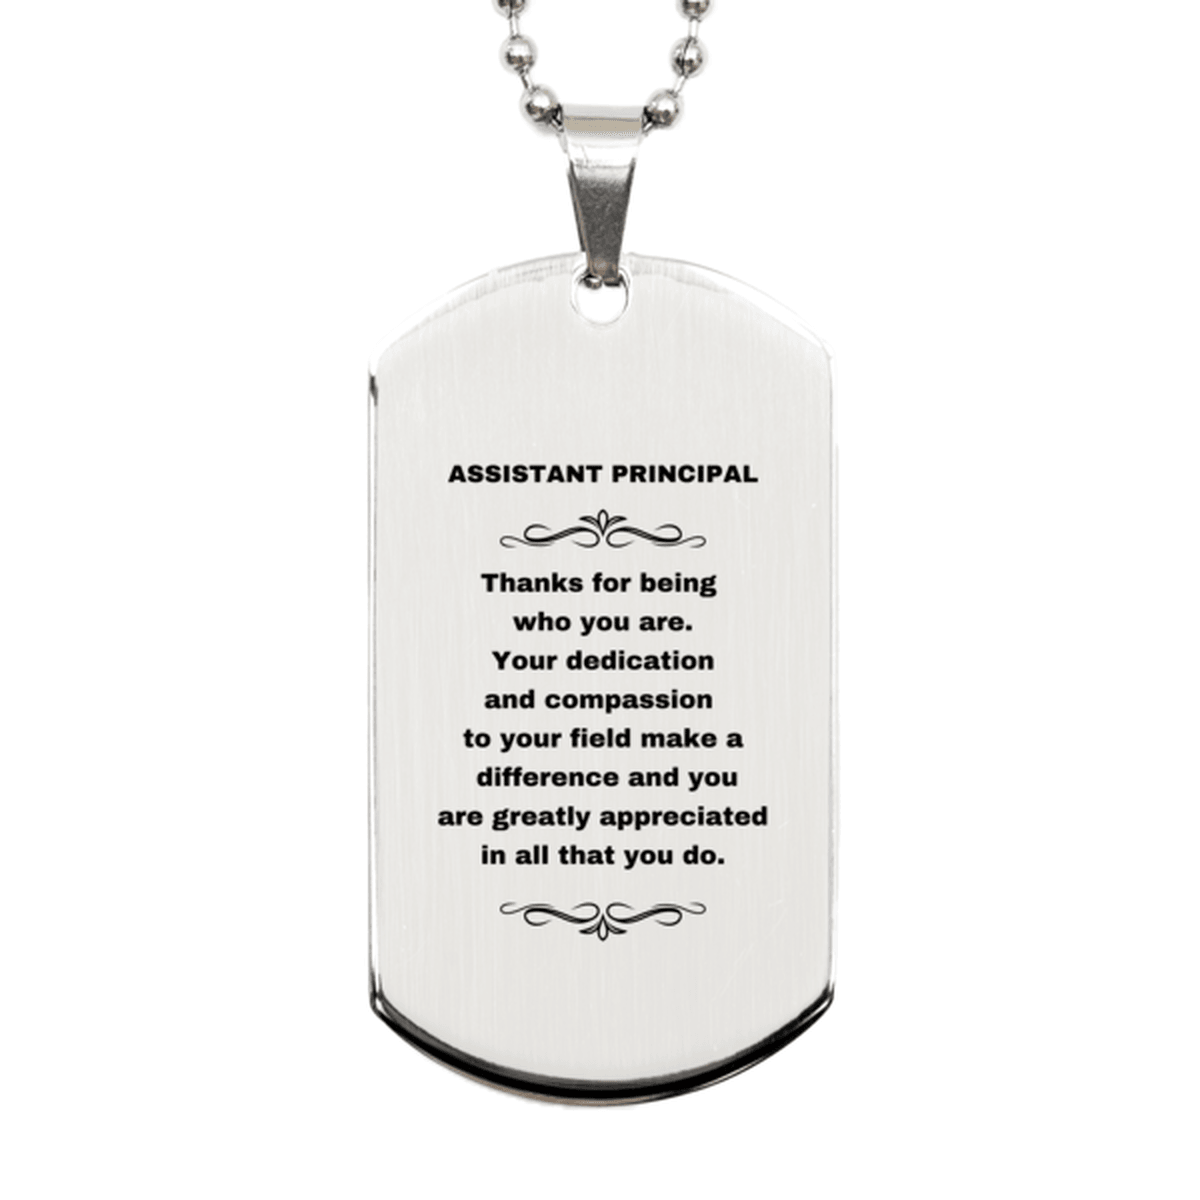 Assistant Principal Silver Dog Tag Engraved Necklace - Thanks for being who you are - Birthday Christmas Jewelry Gifts Coworkers Colleague Boss - Mallard Moon Gift Shop